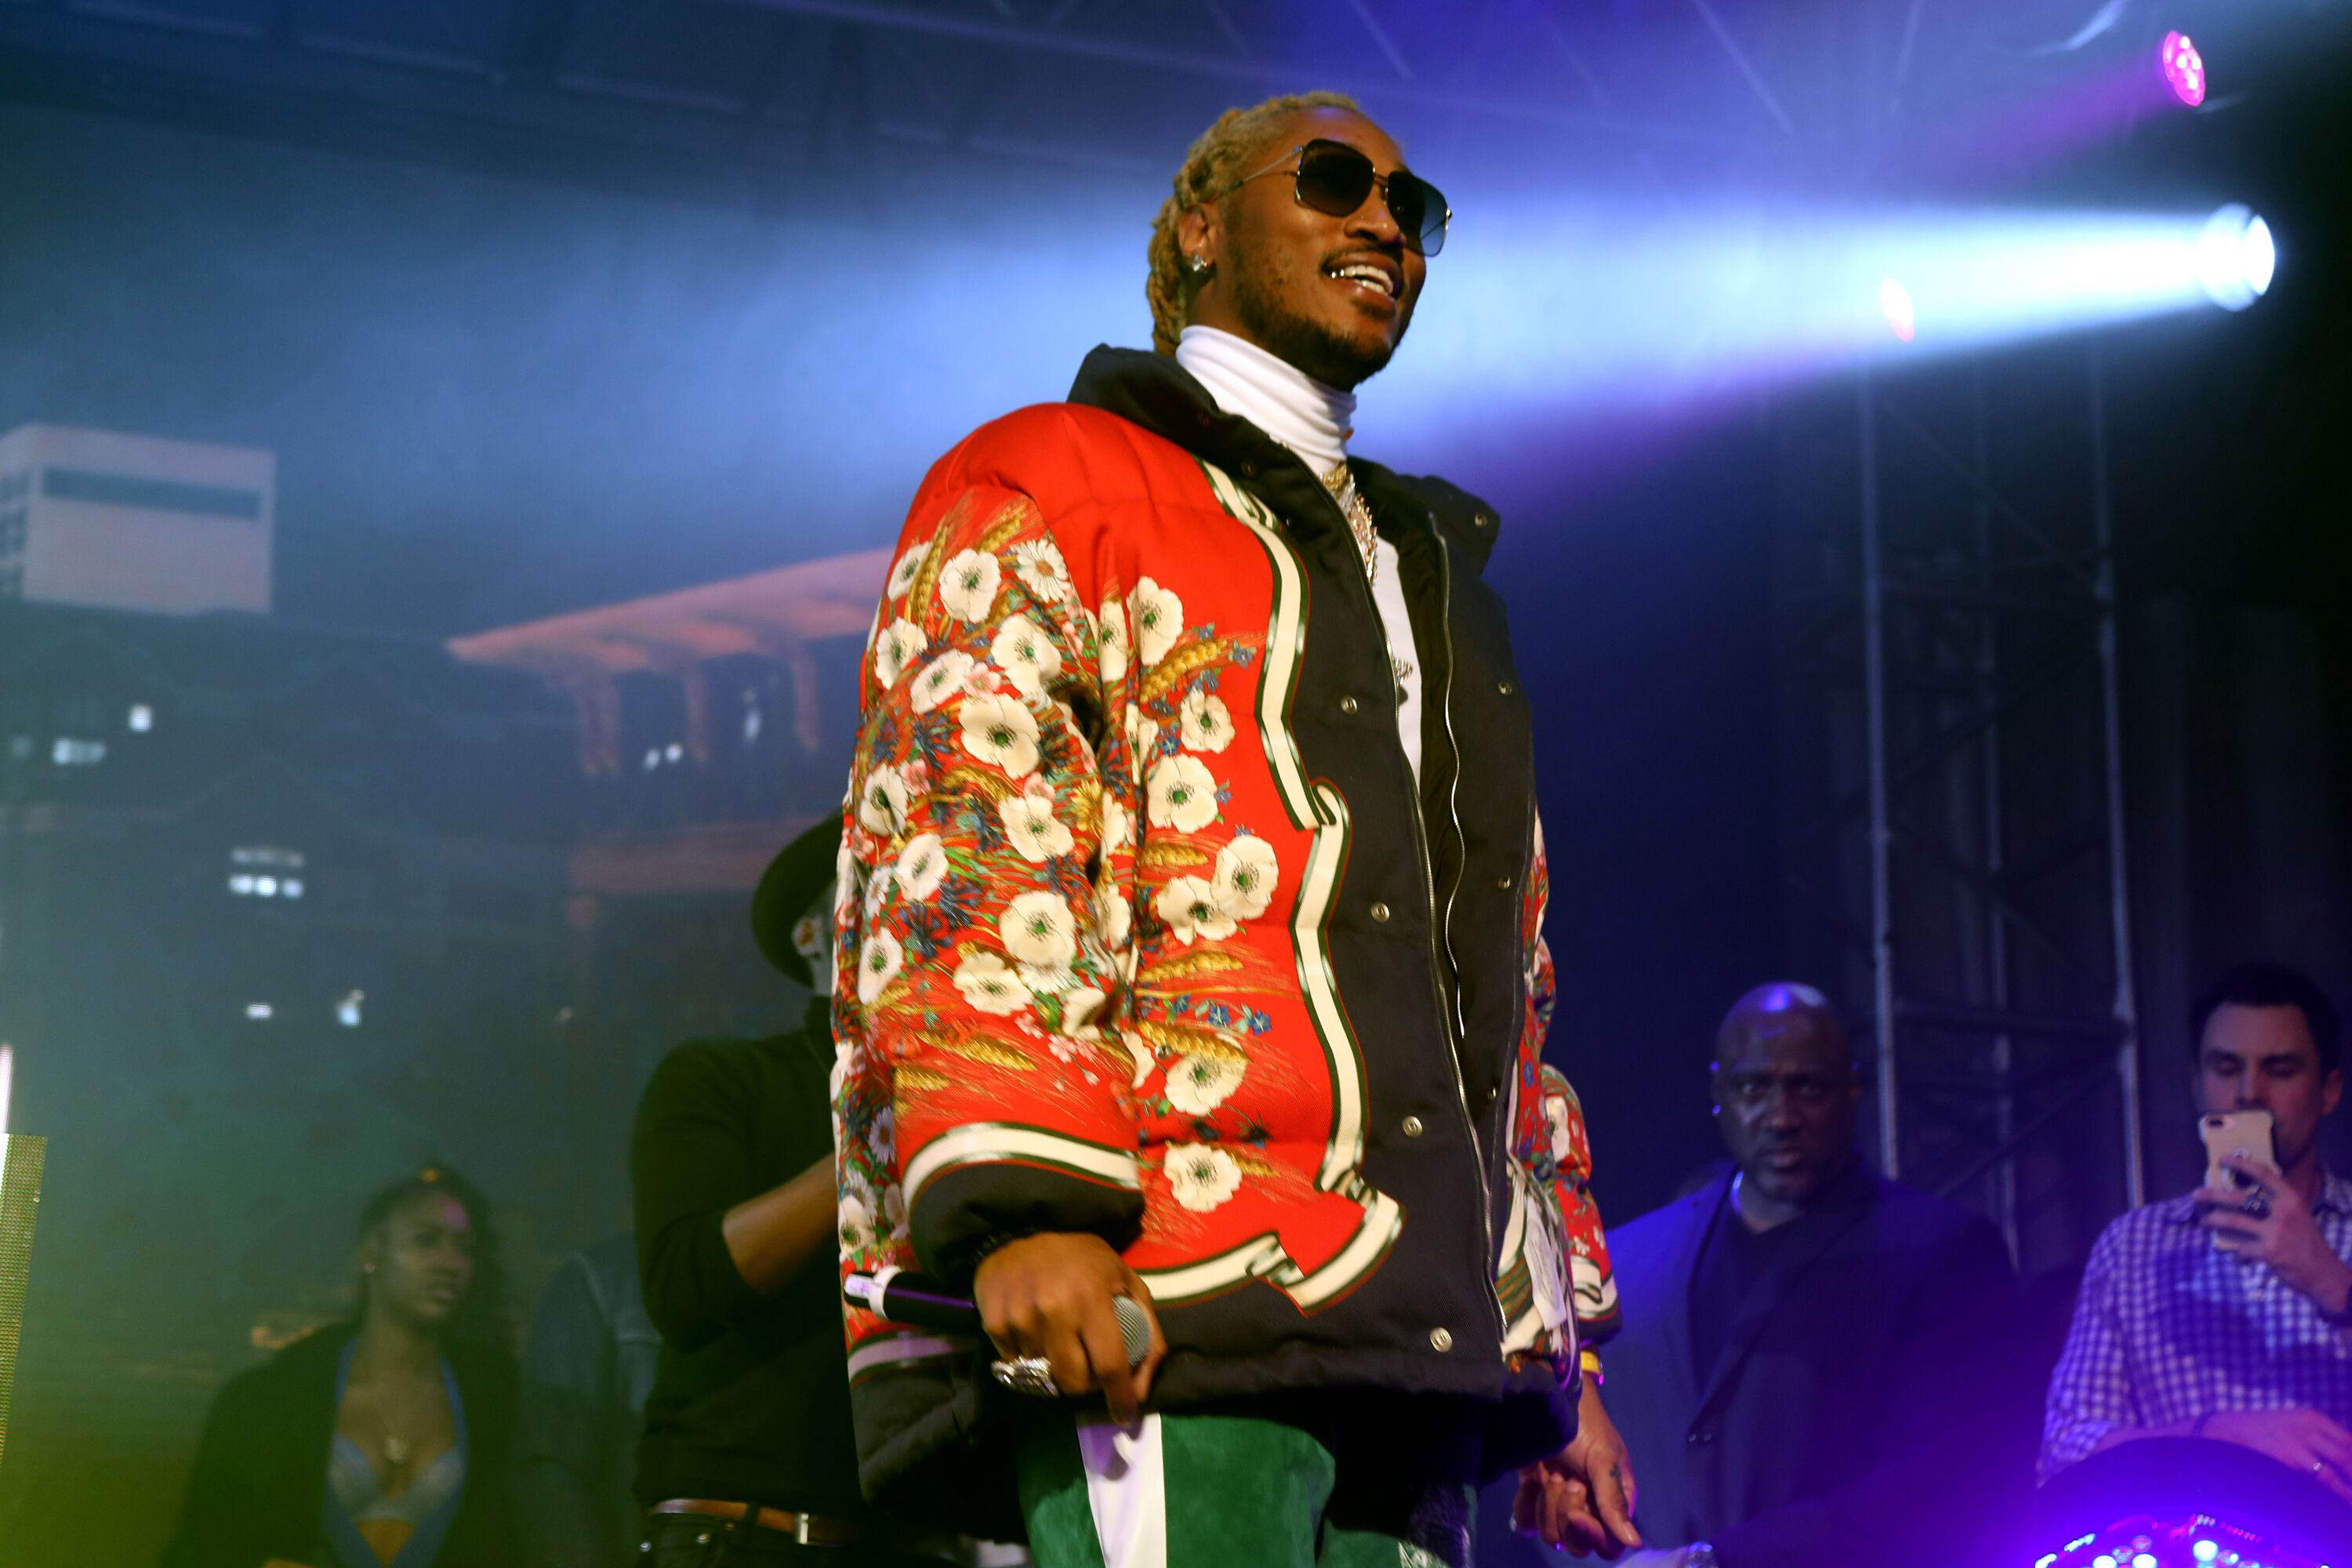 Rapper Future in concert/ Source: Getty Images